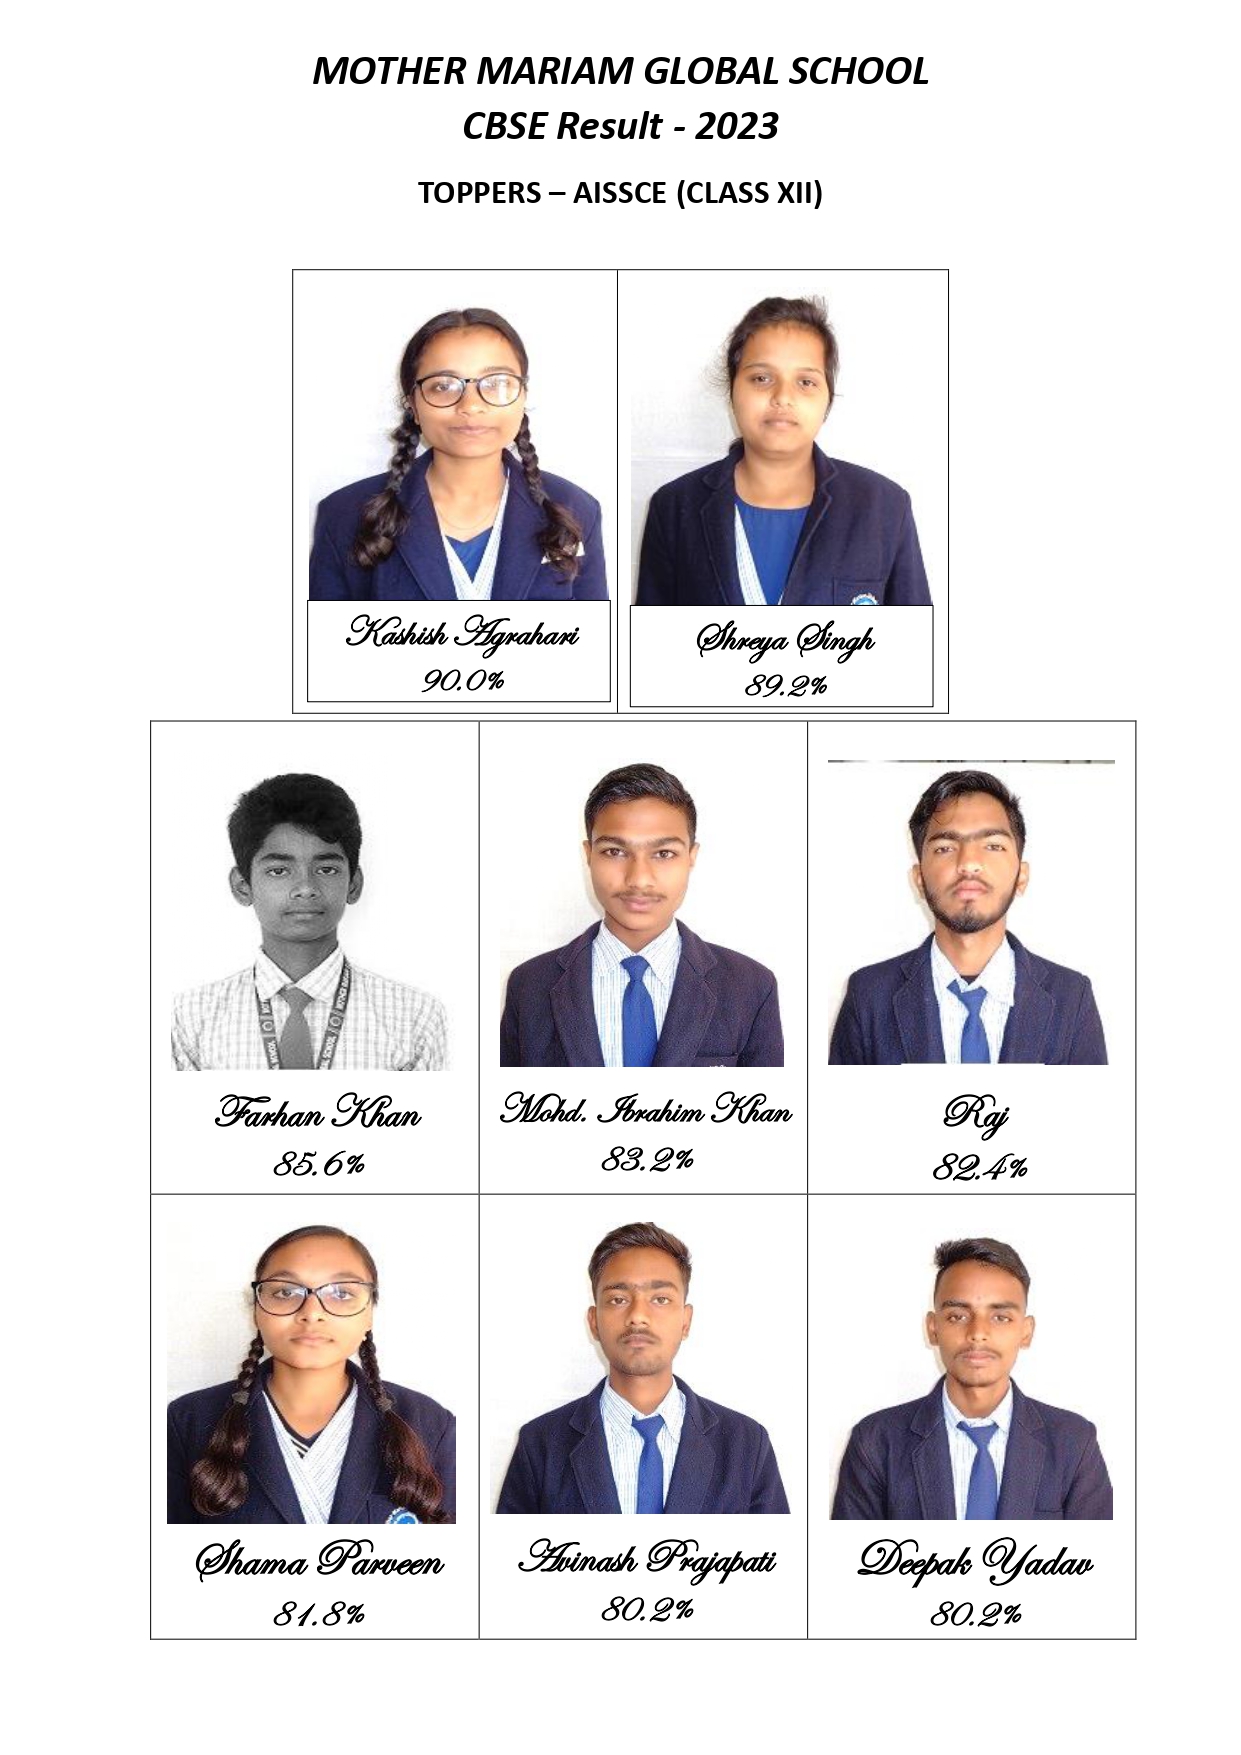 Class XII toppers